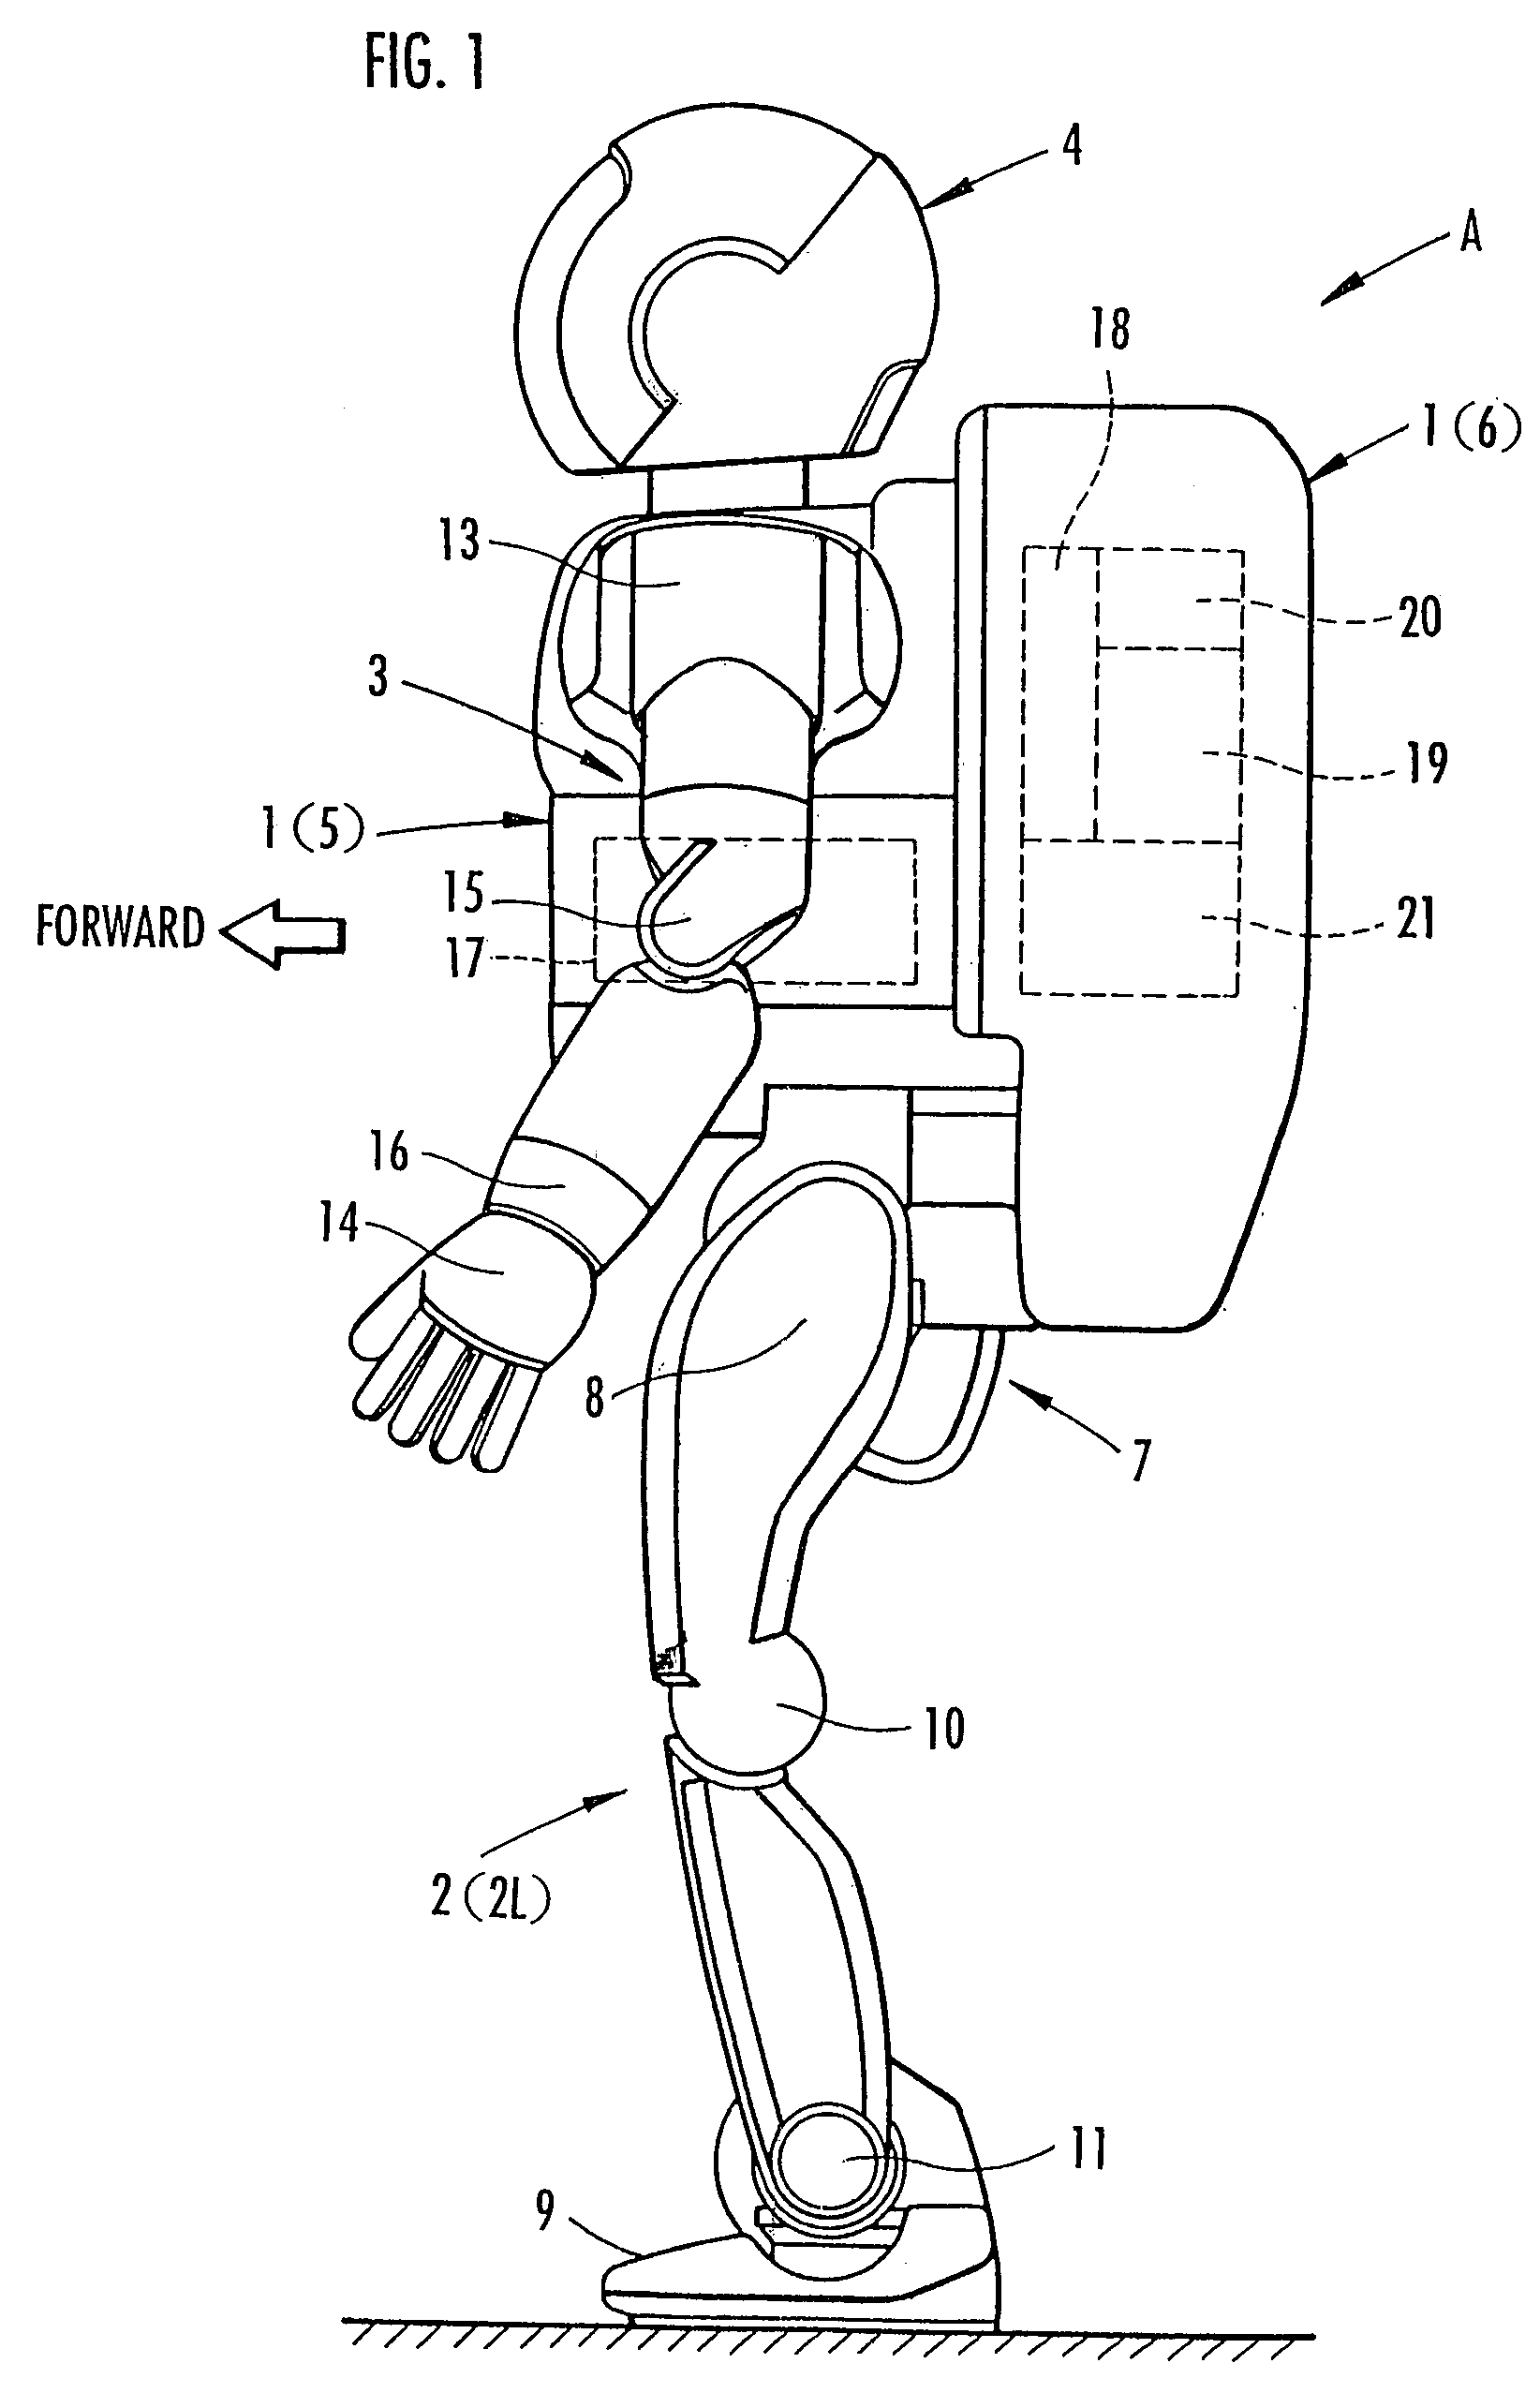 Remote control device of bipedal mobile robot